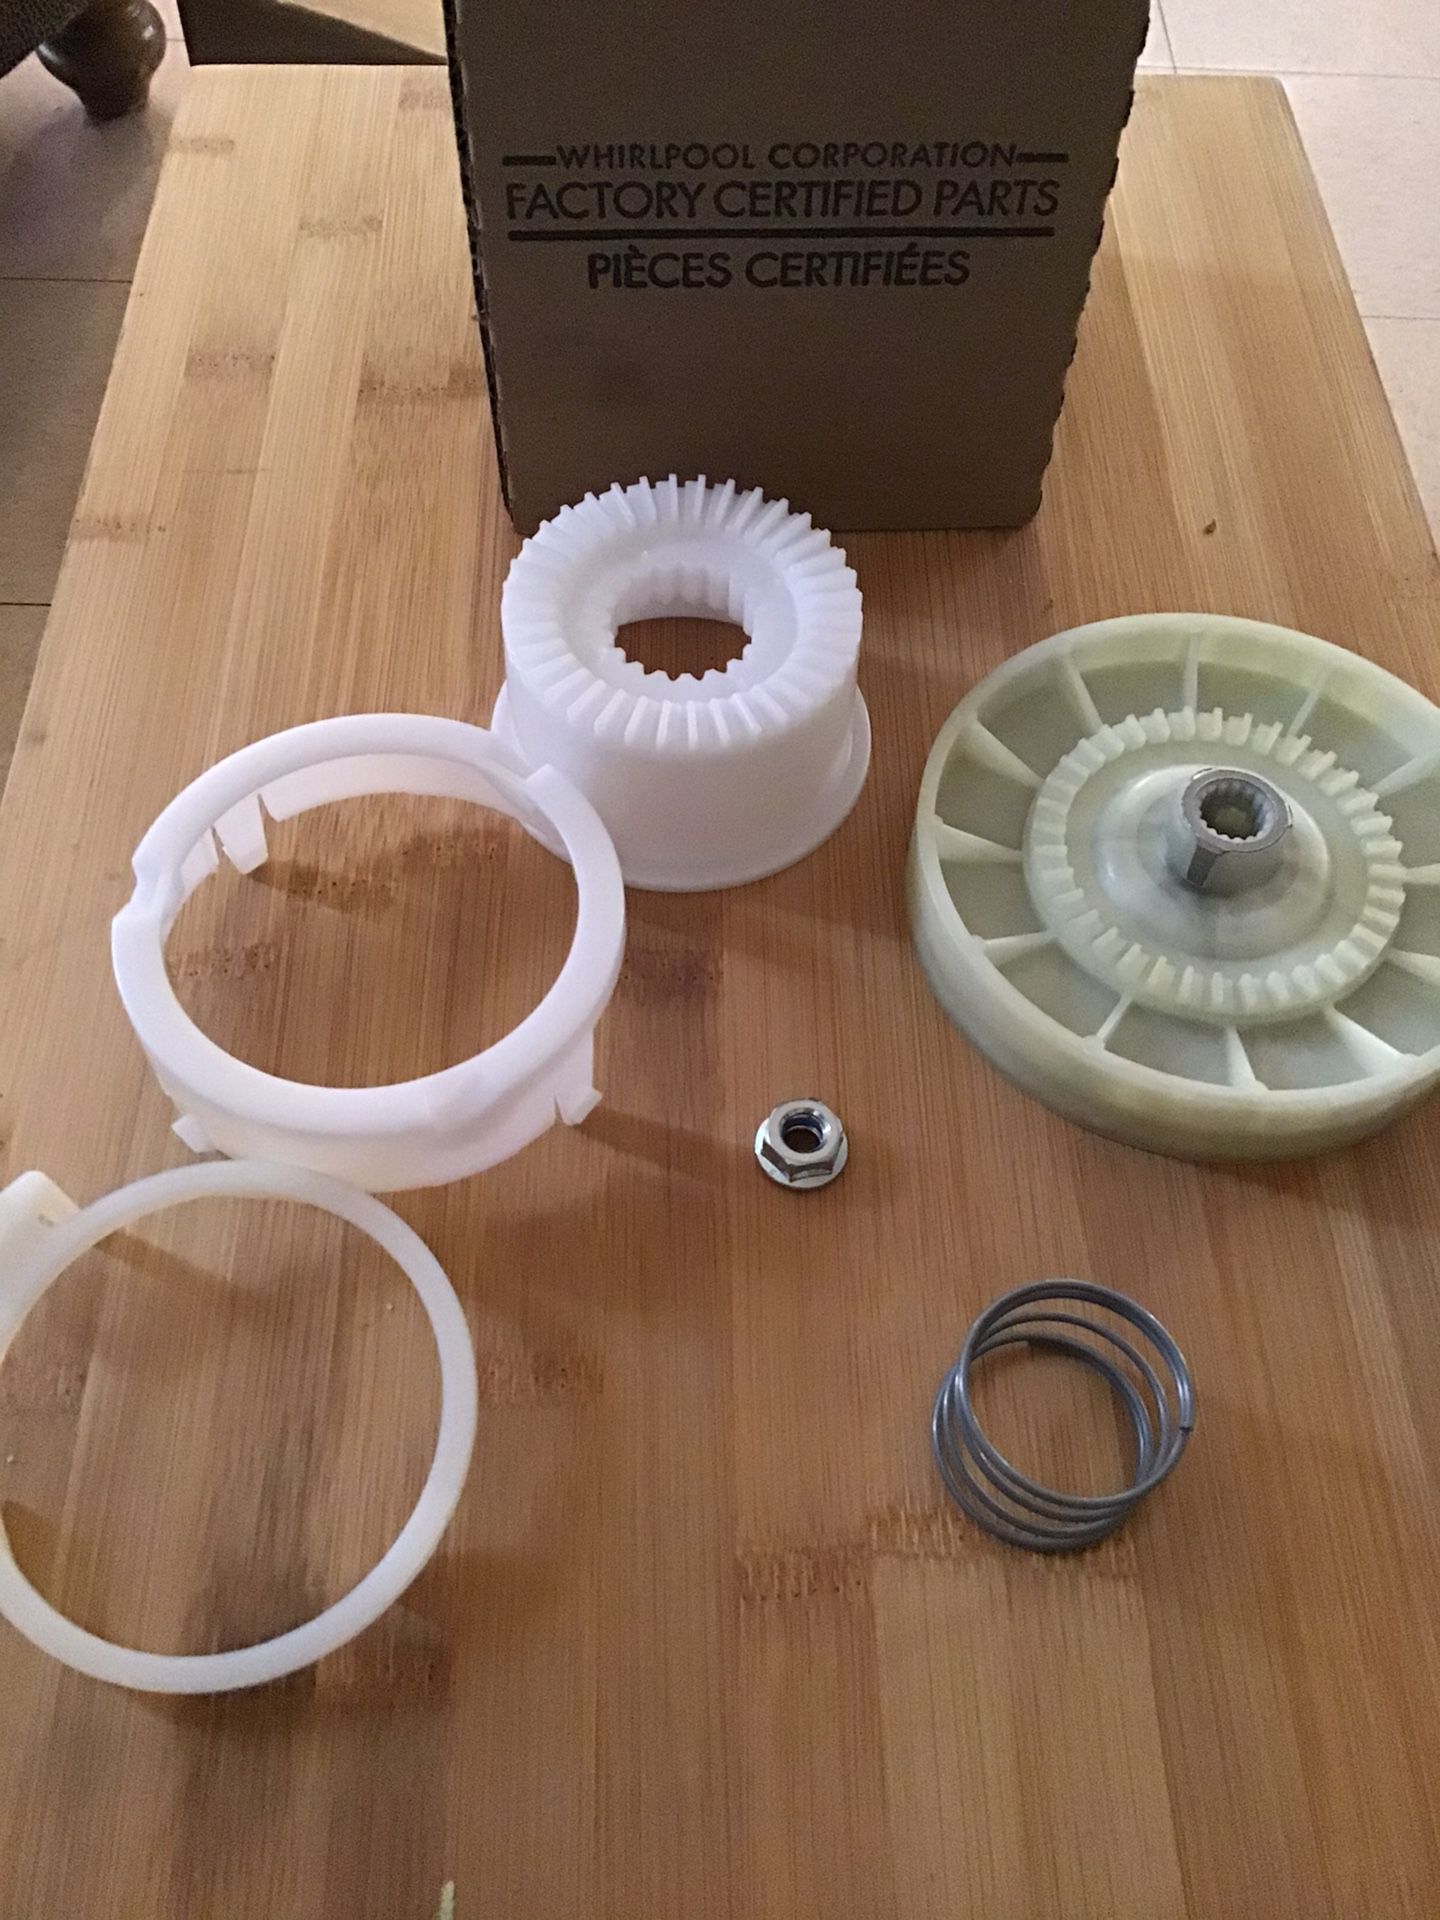 New Washing Machine Part Kit Fits Kenmore Or Whirlpool